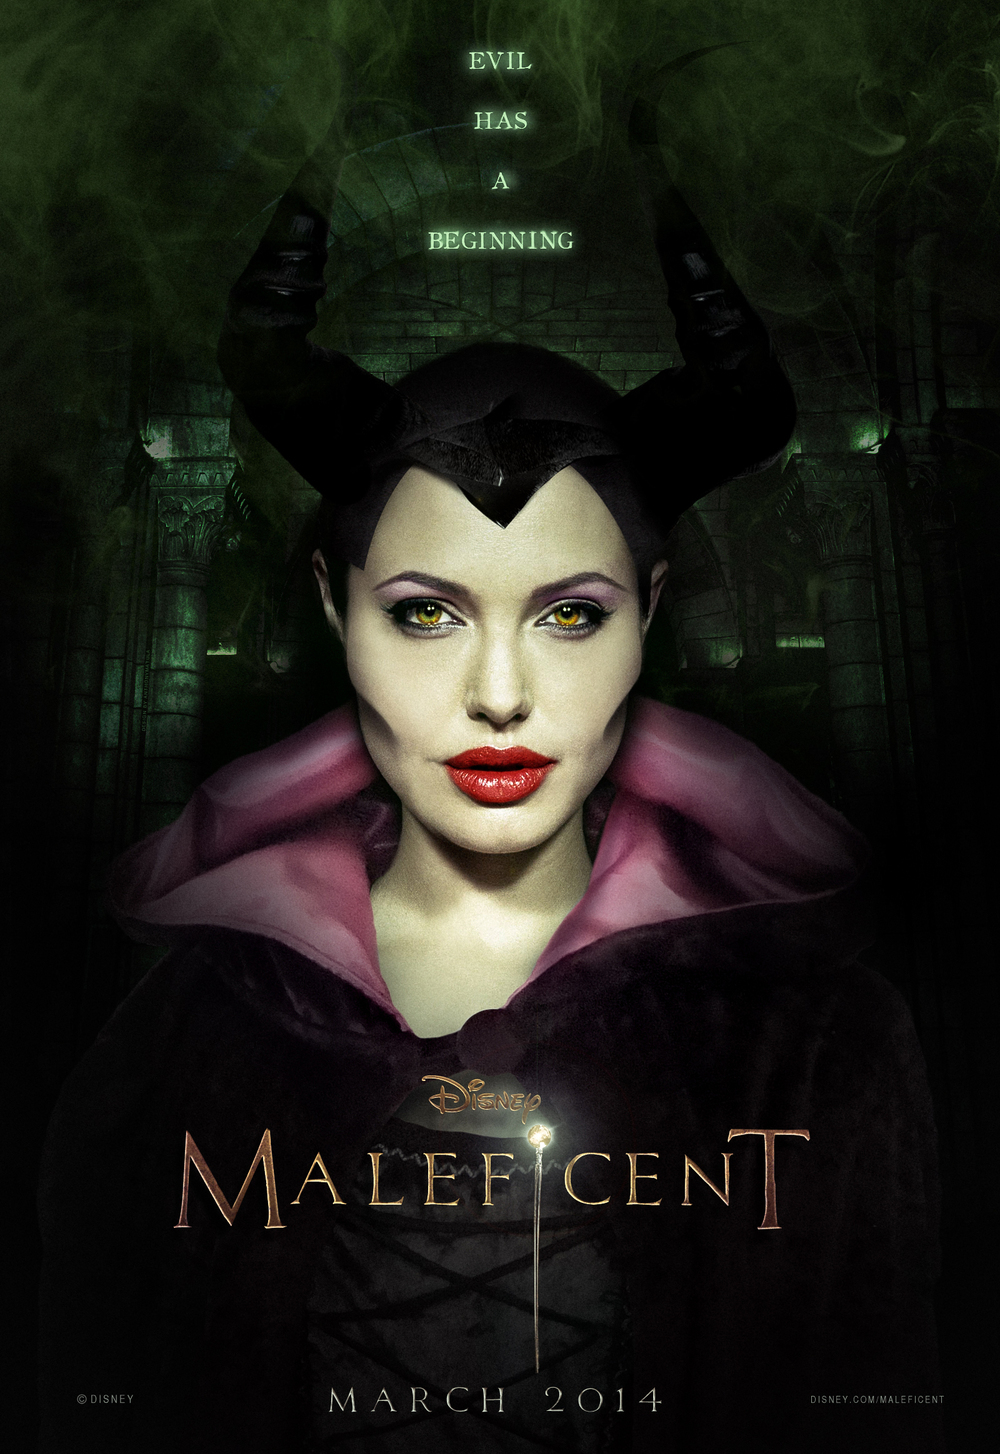 MALEFICENT - The Review